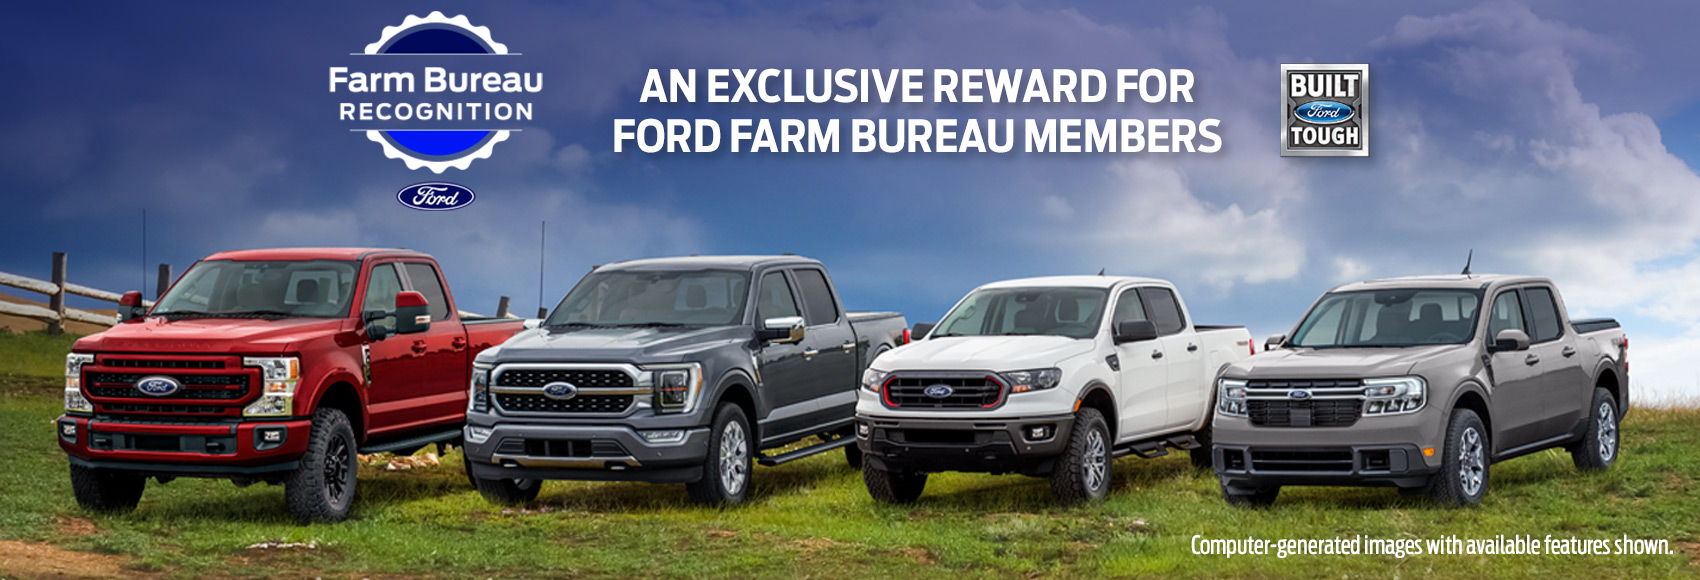 An exclusive offer for Ford Farm Bureau members.  Ford F-150, Super Duty, Ranger, and Maverick on a grassy plain.